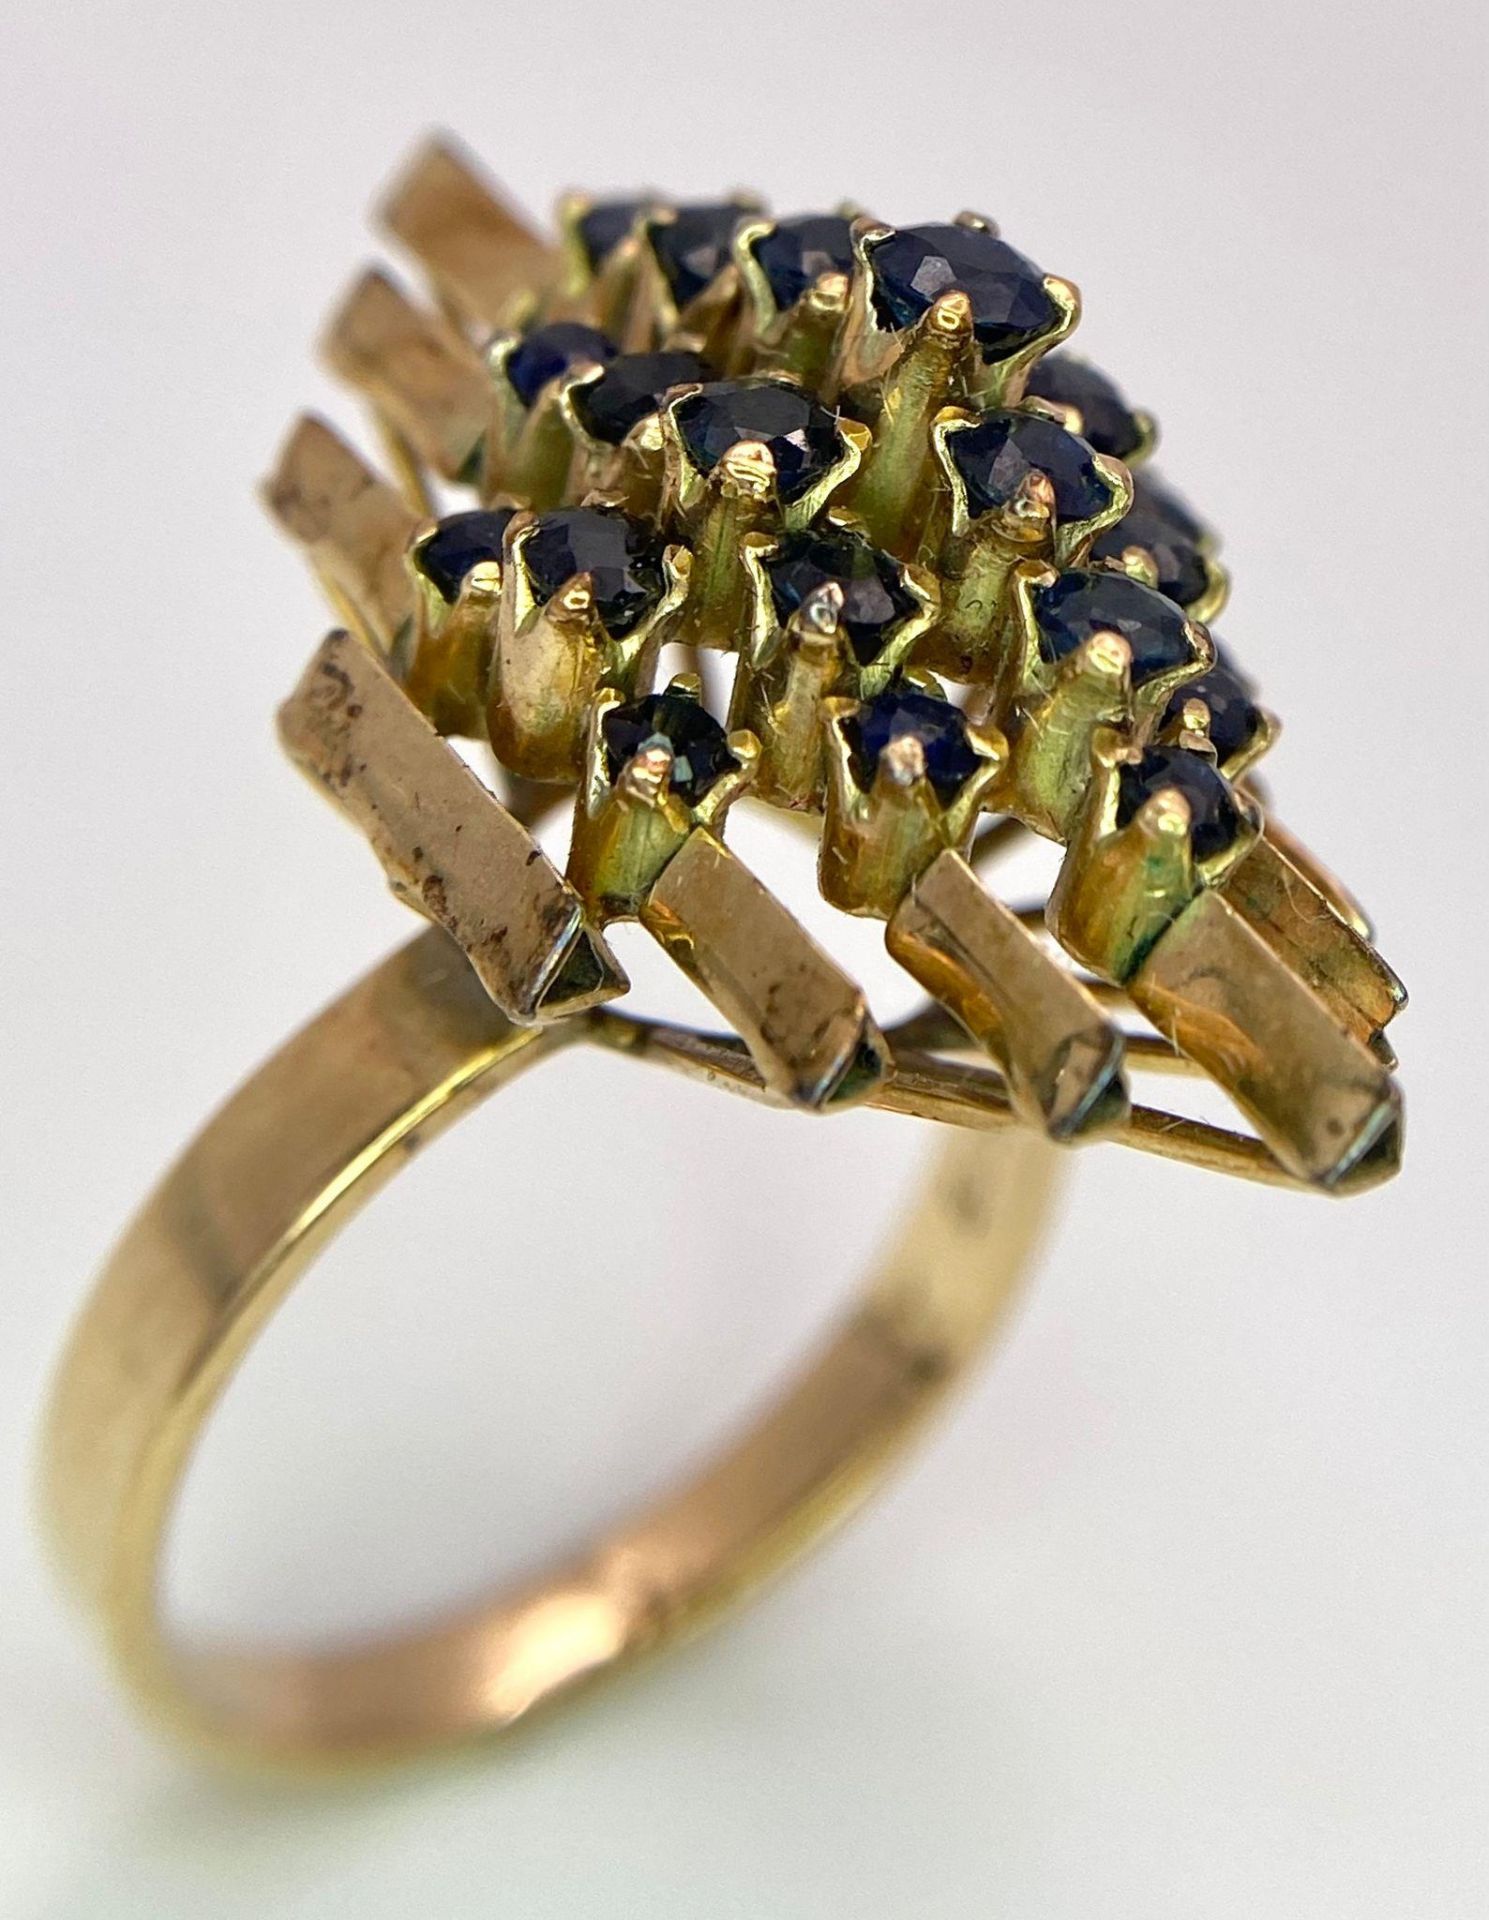 A vintage, 14 K yellow gold ring with a crown of Ceylon, round cut, vivid dark blue sapphires, - Image 3 of 6